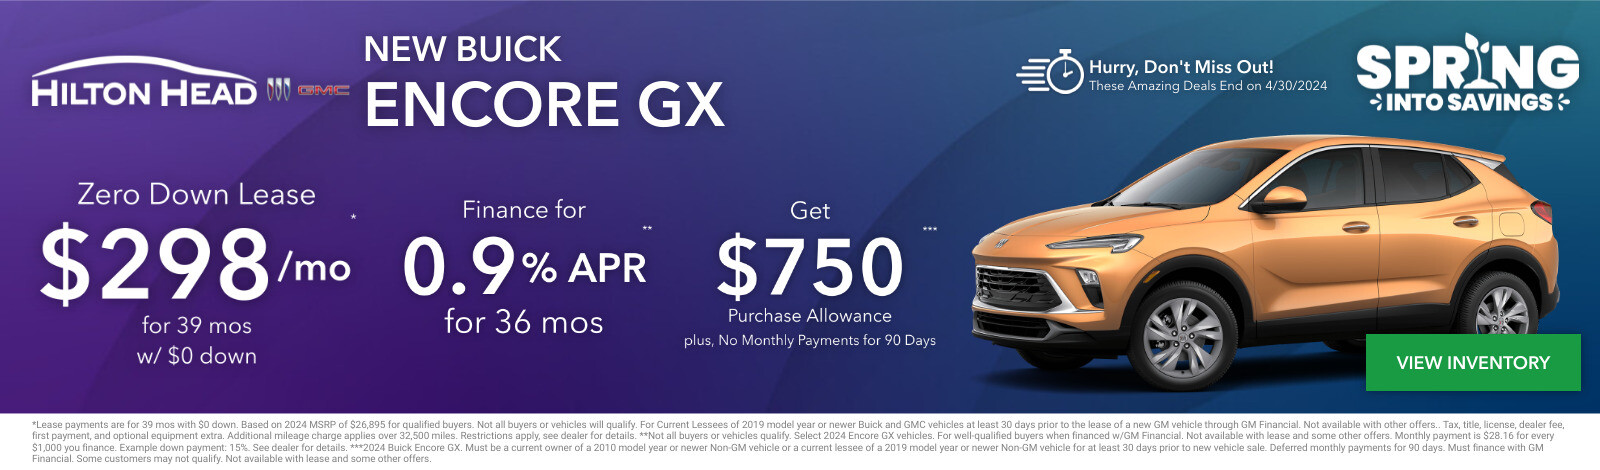 New Buick Encore GX Current Deals and Offers in Savannah, GA